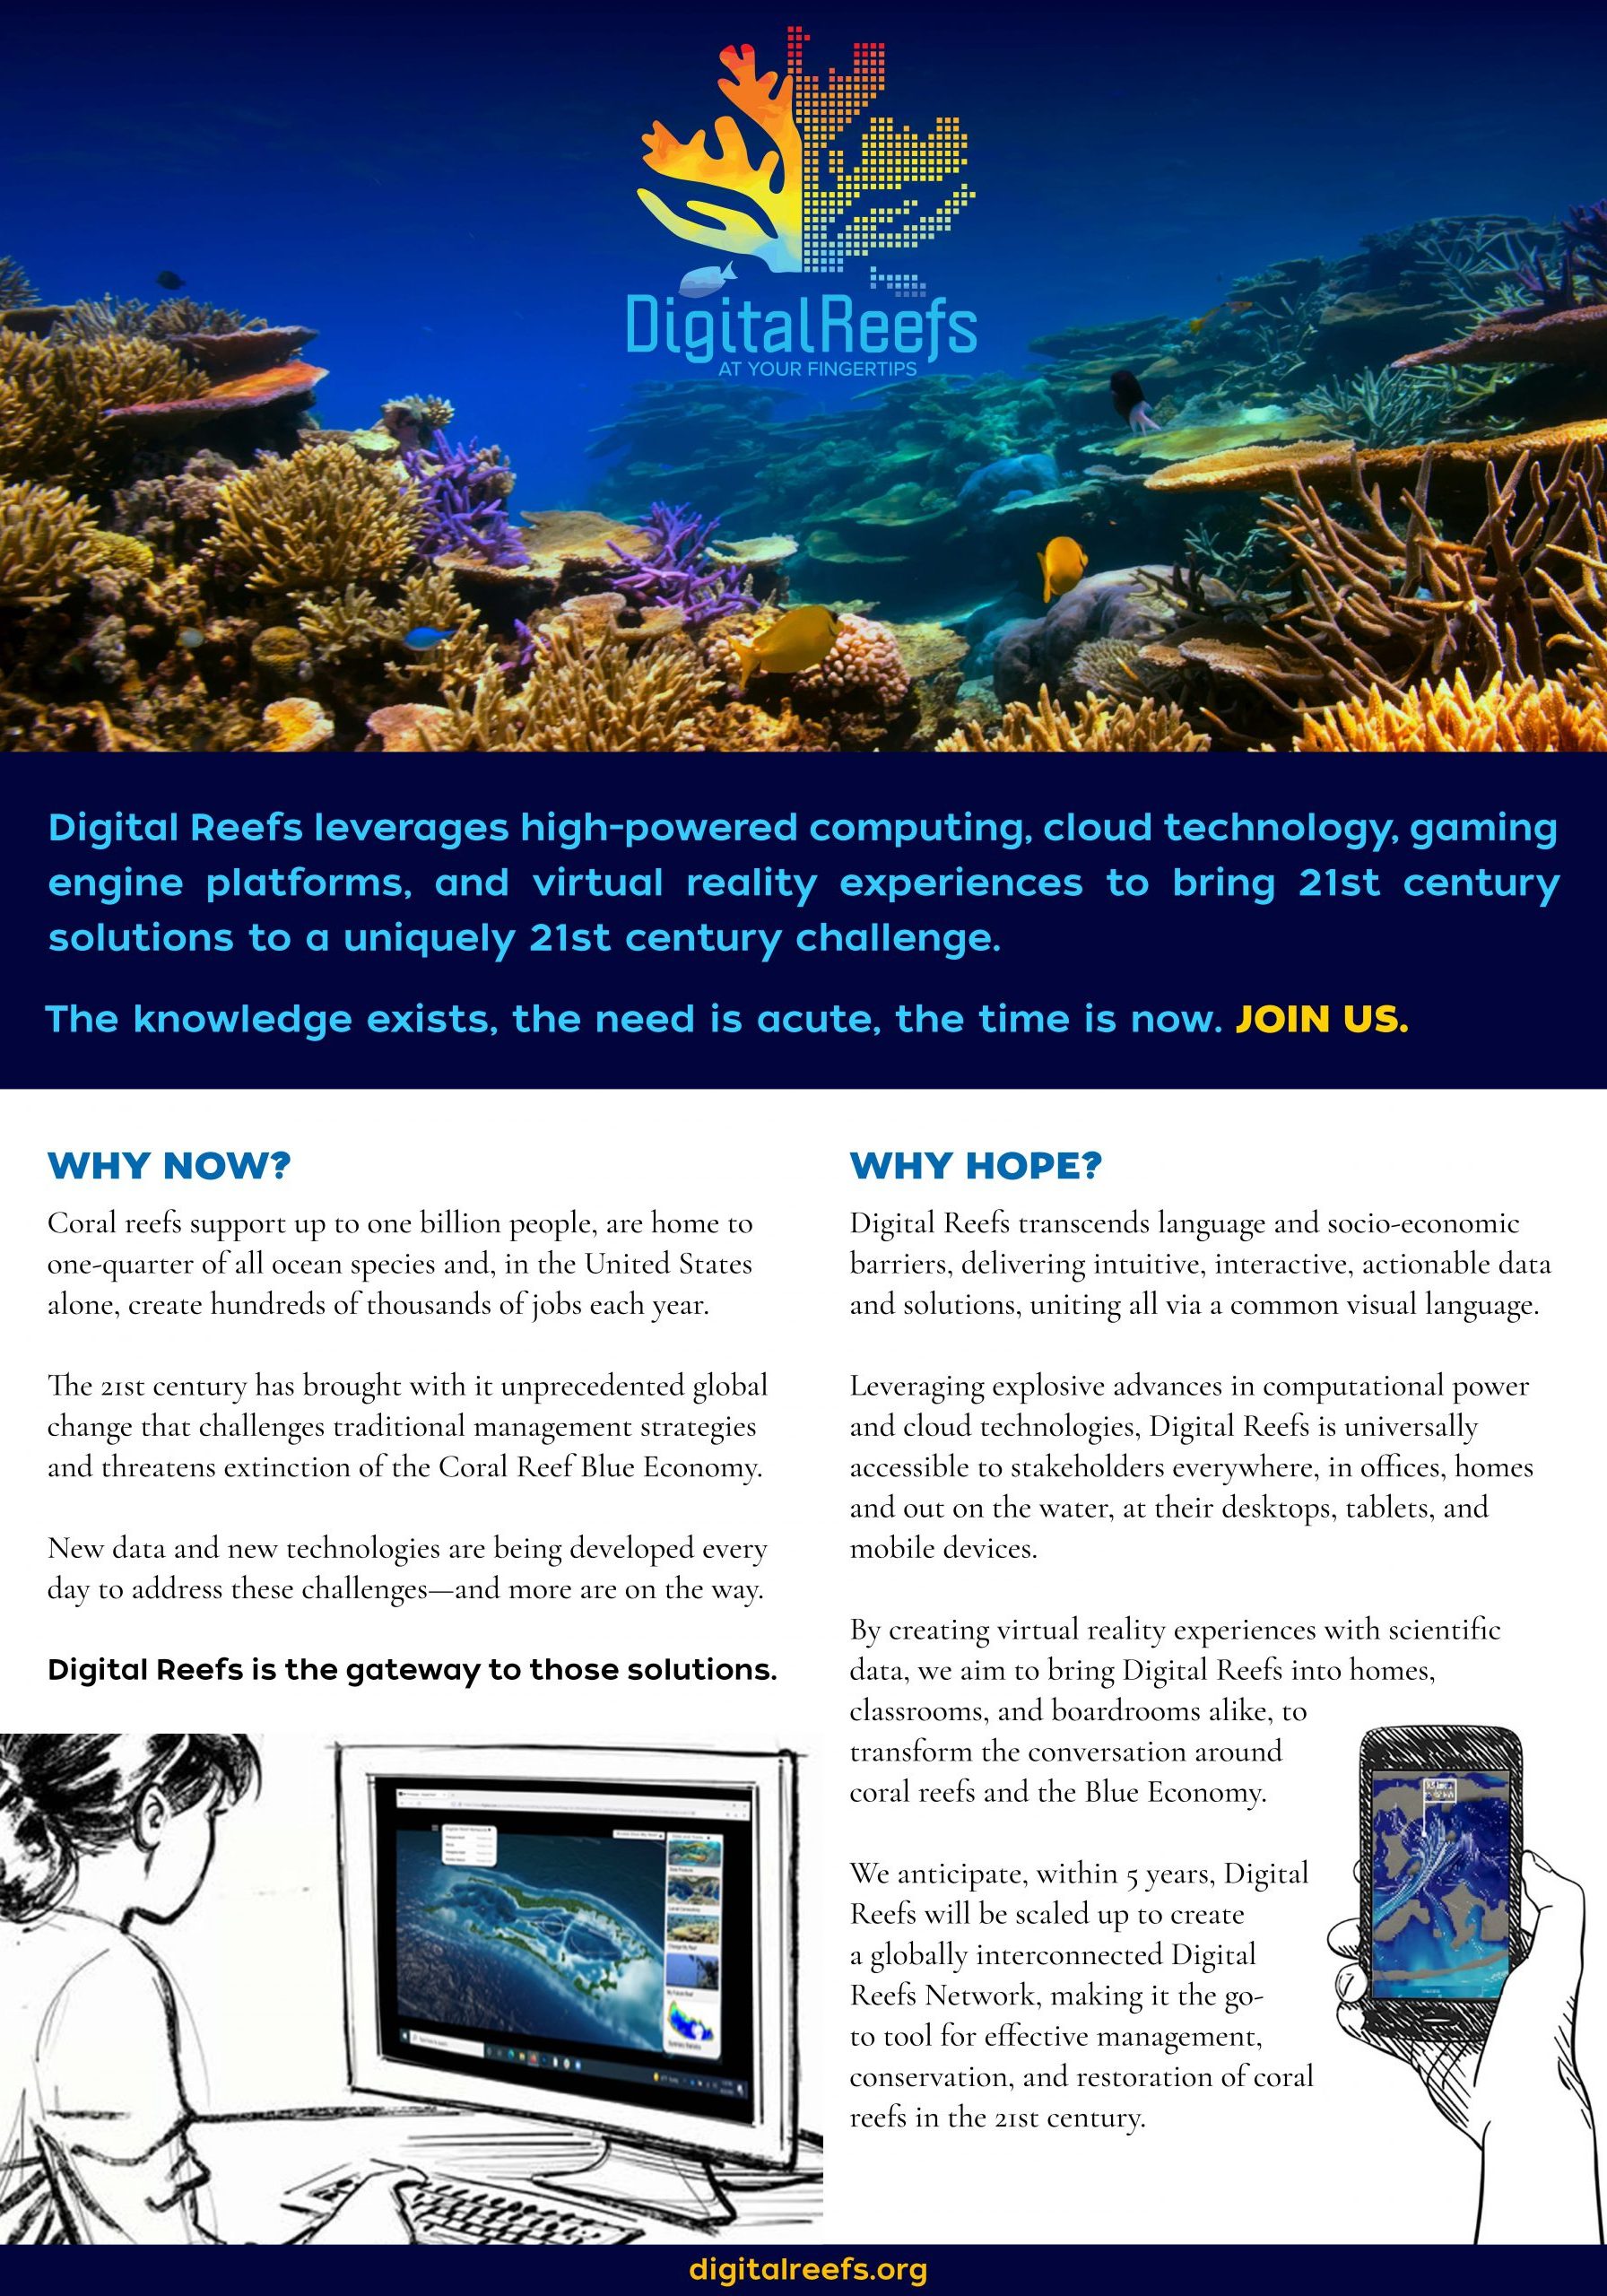 New window with Digital Reefs overview